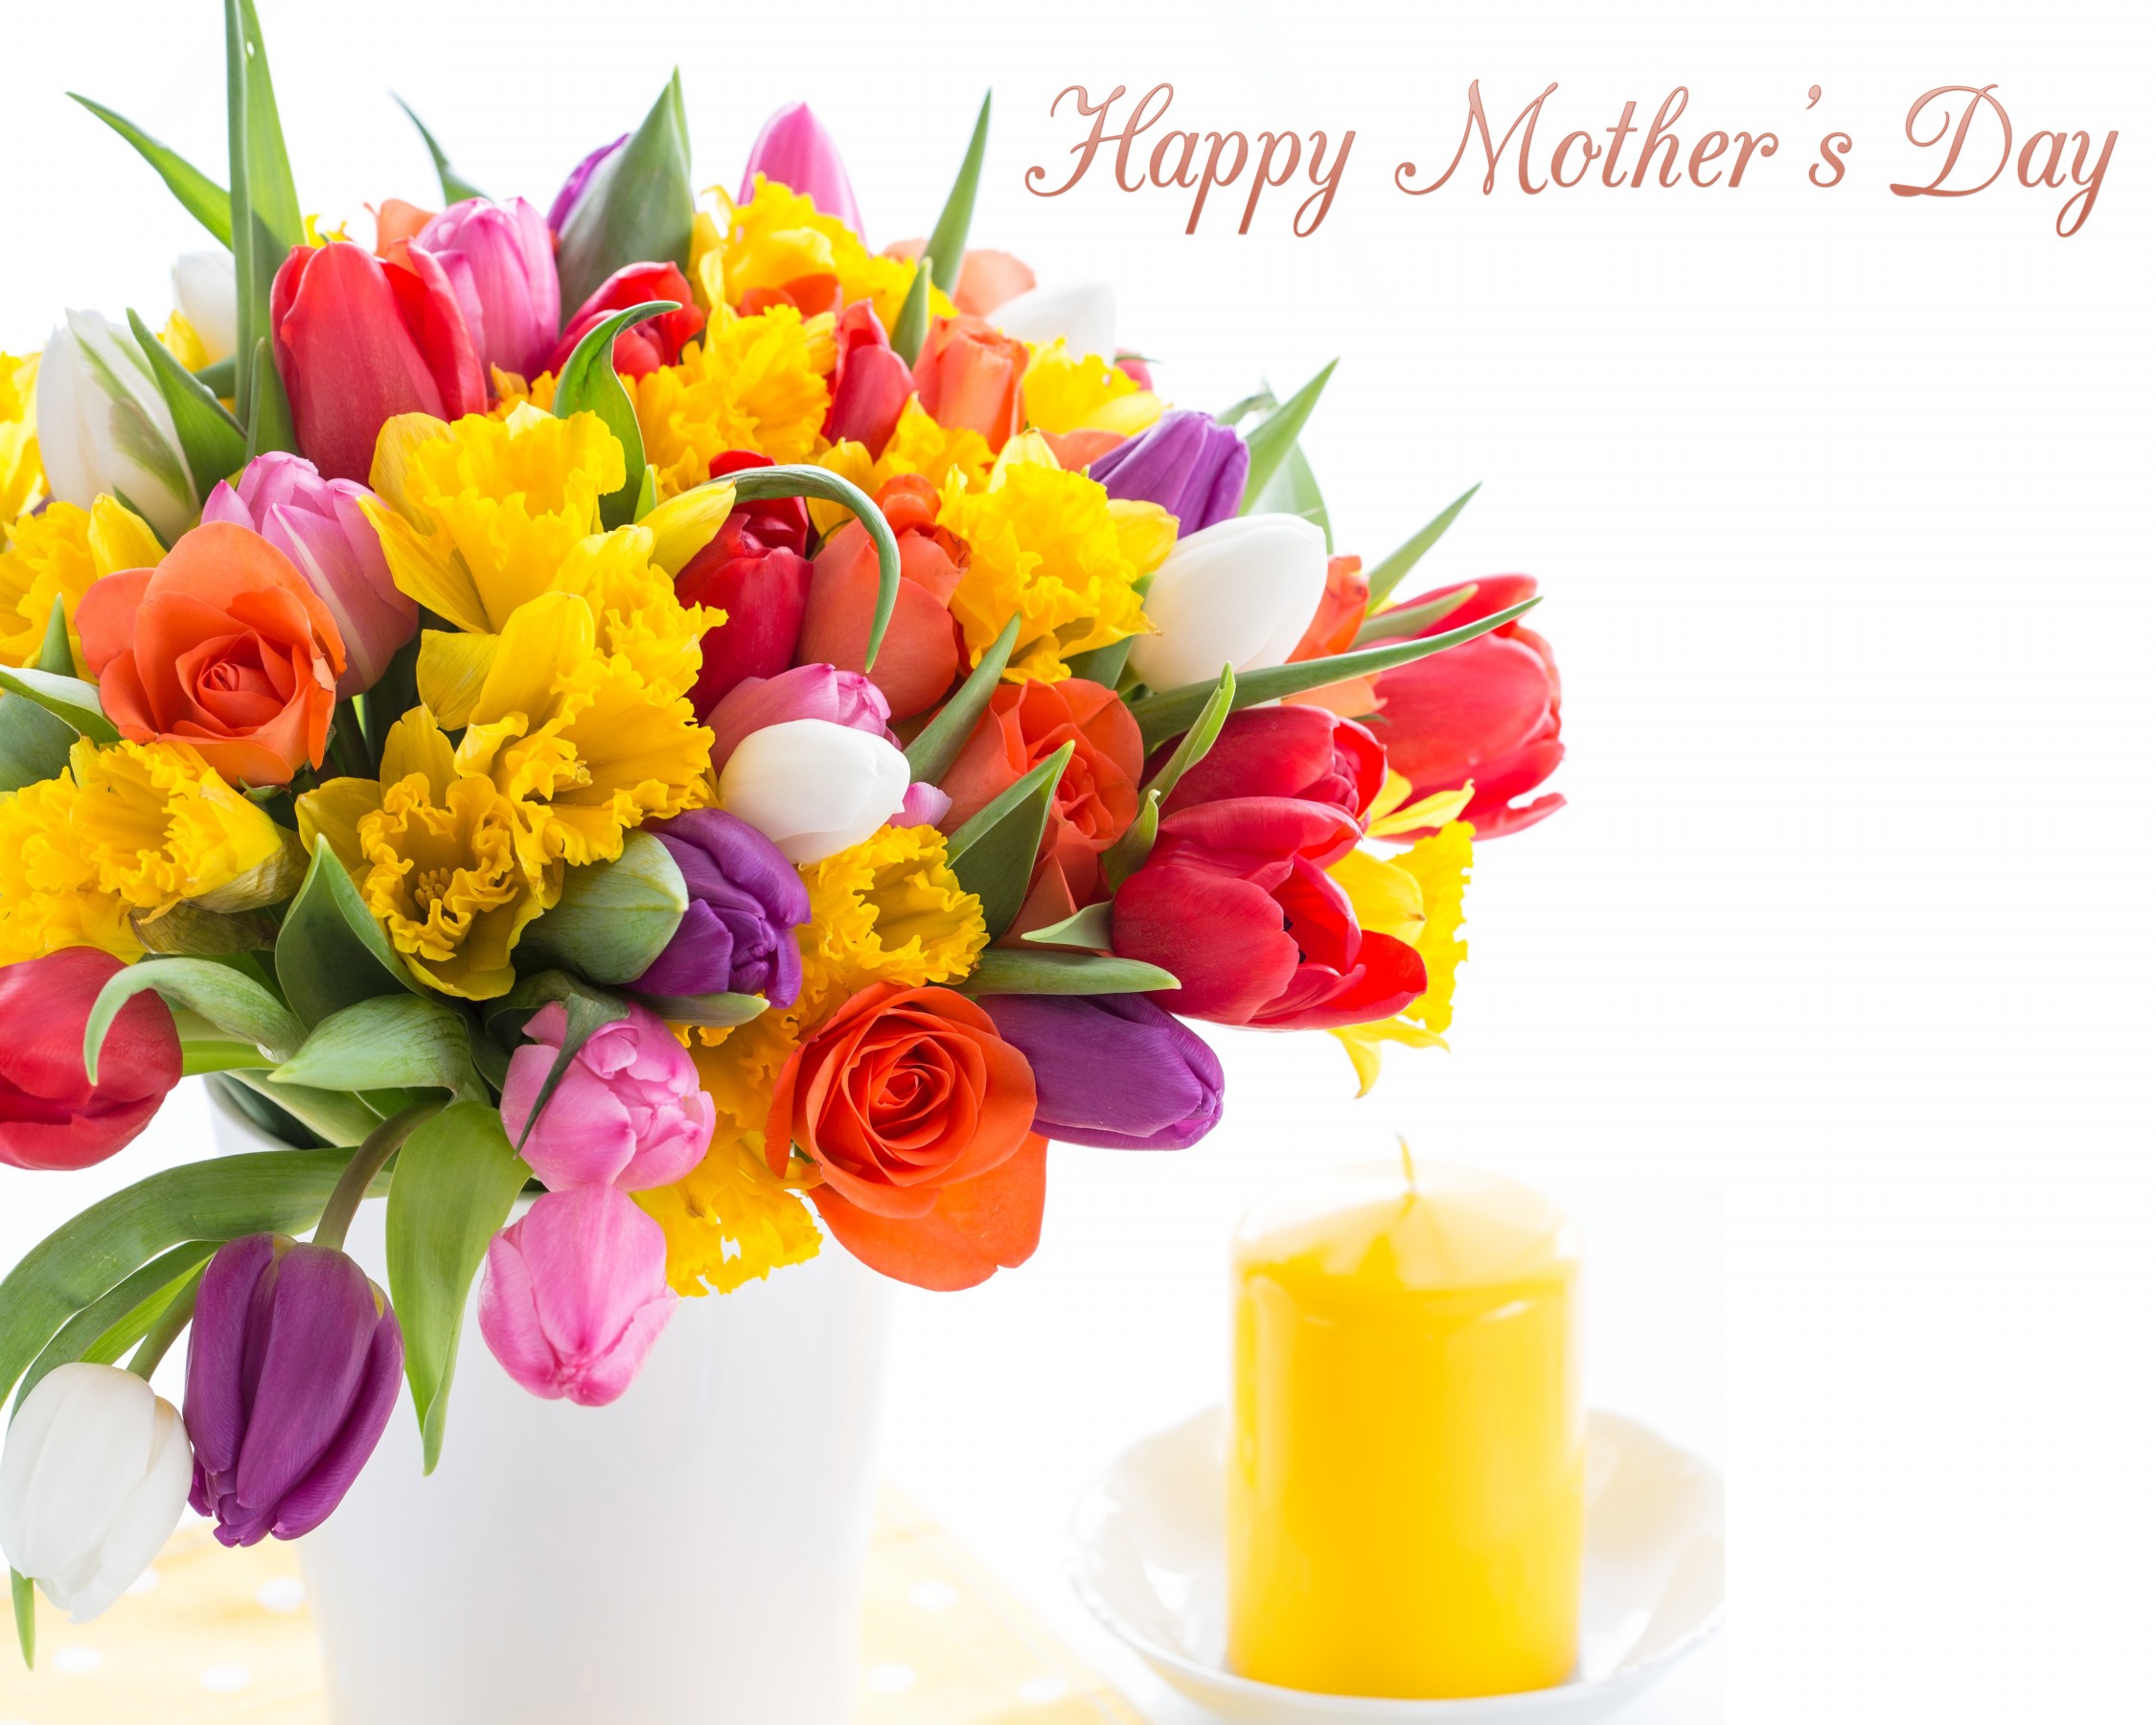 Mothers-Day-Flowers-Images-1.jpg